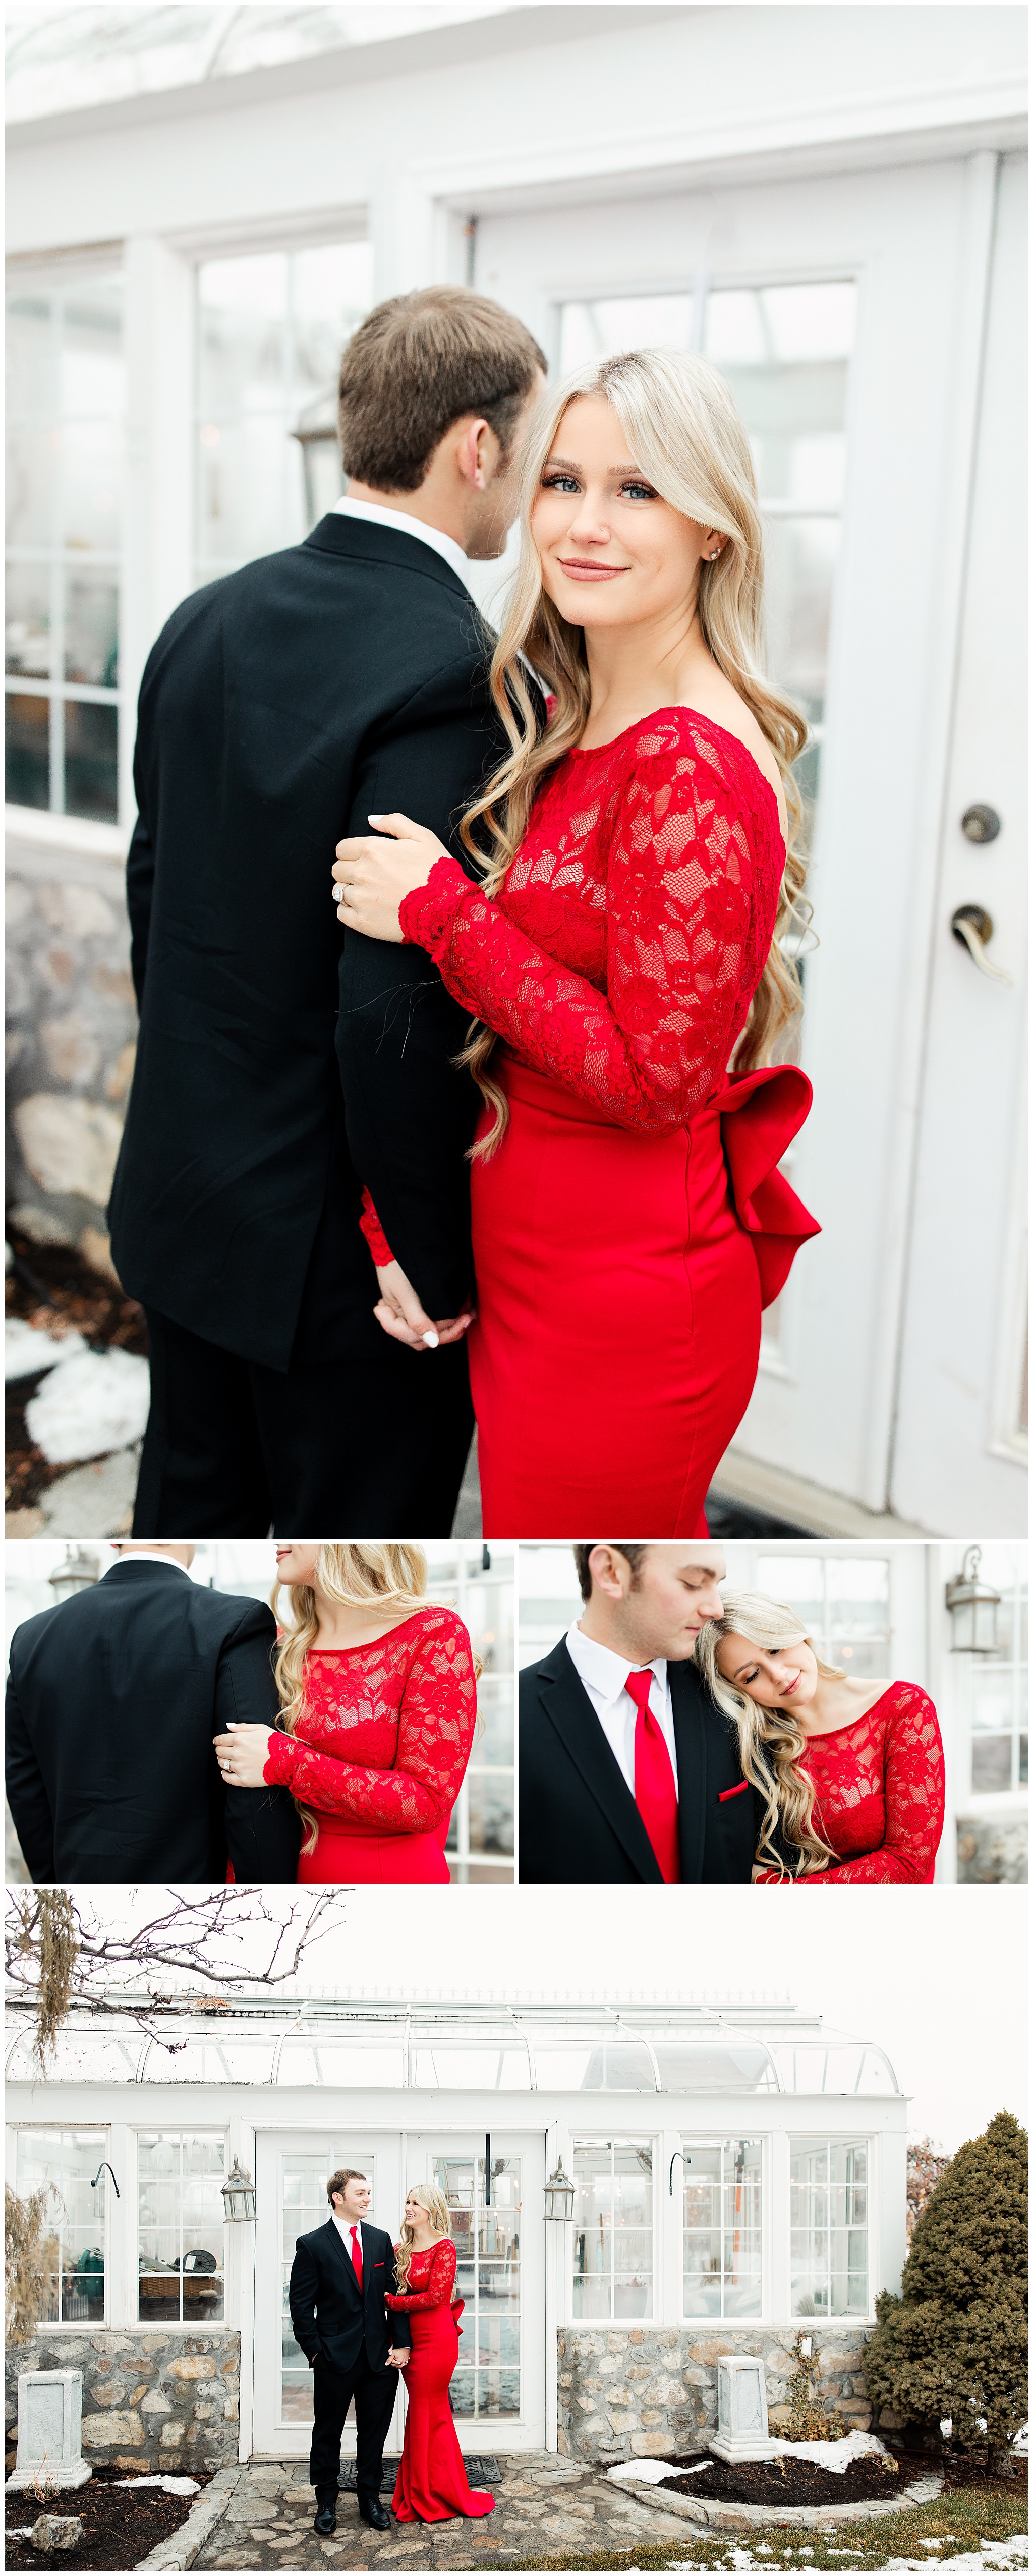 Red dress, Formal engagements, What to wear at an engagement session, Formal red dress, Utah engagement session, Wadley farms wedding